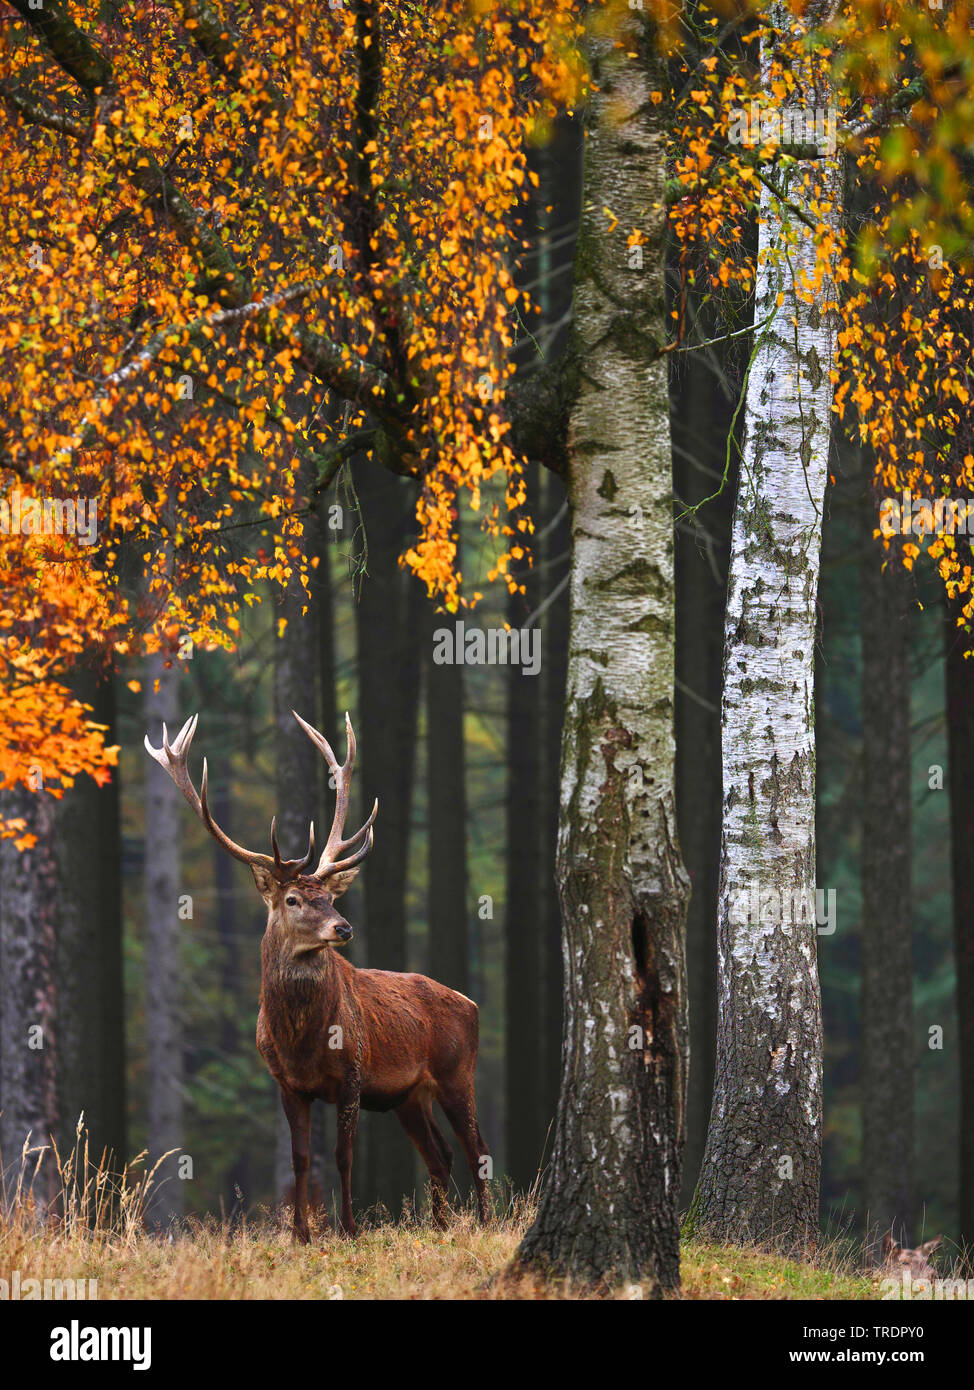 red deer (Cervus elaphus), red deer stag in an autumn forest, Germany, Saxony Stock Photo